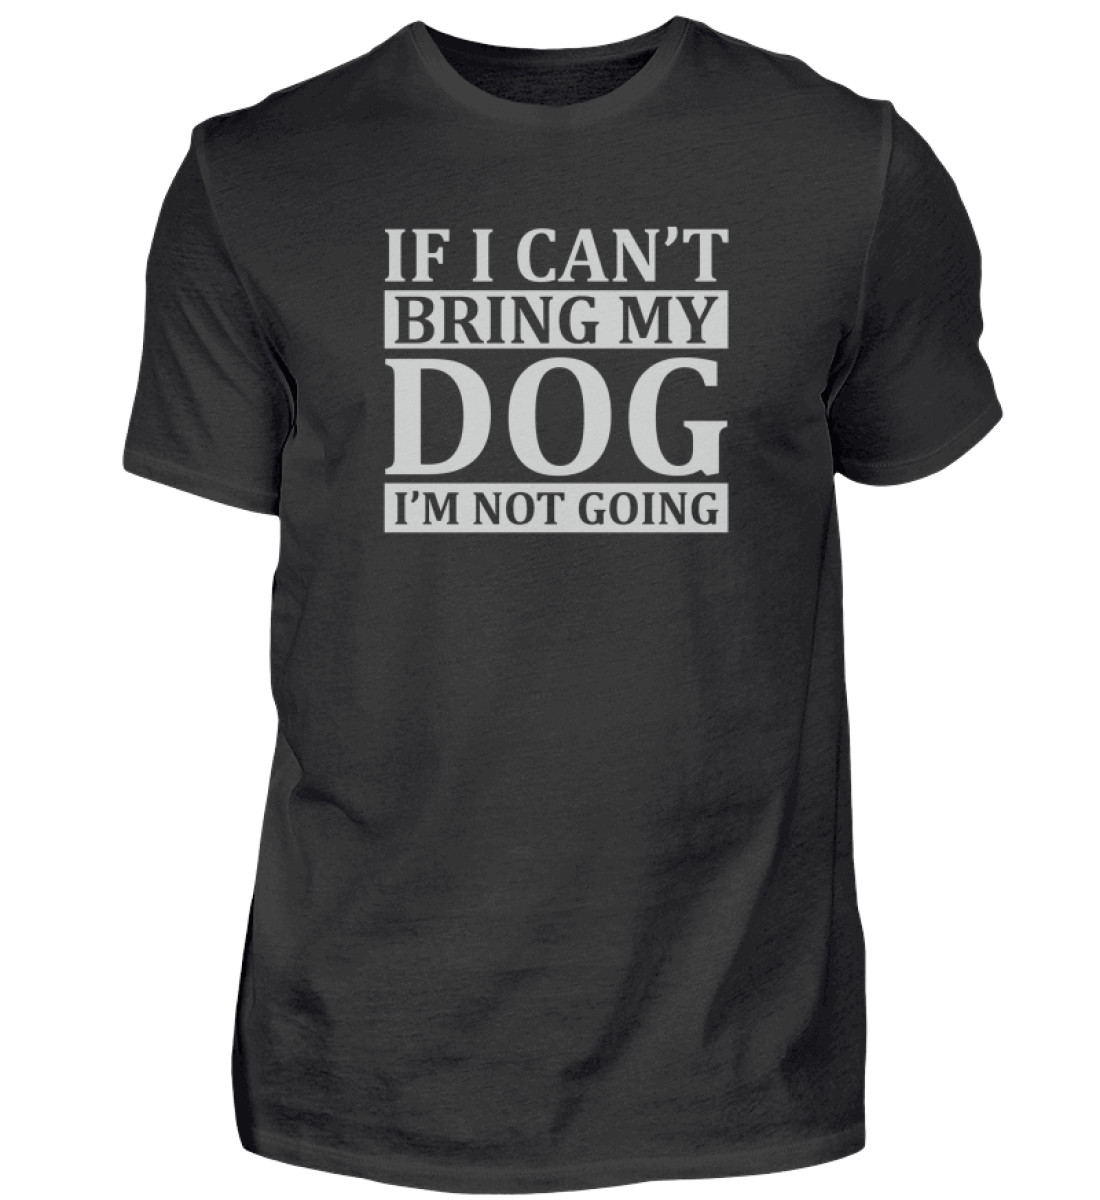 If I can-t bring my dog I-m not going - Herren Shirt-16